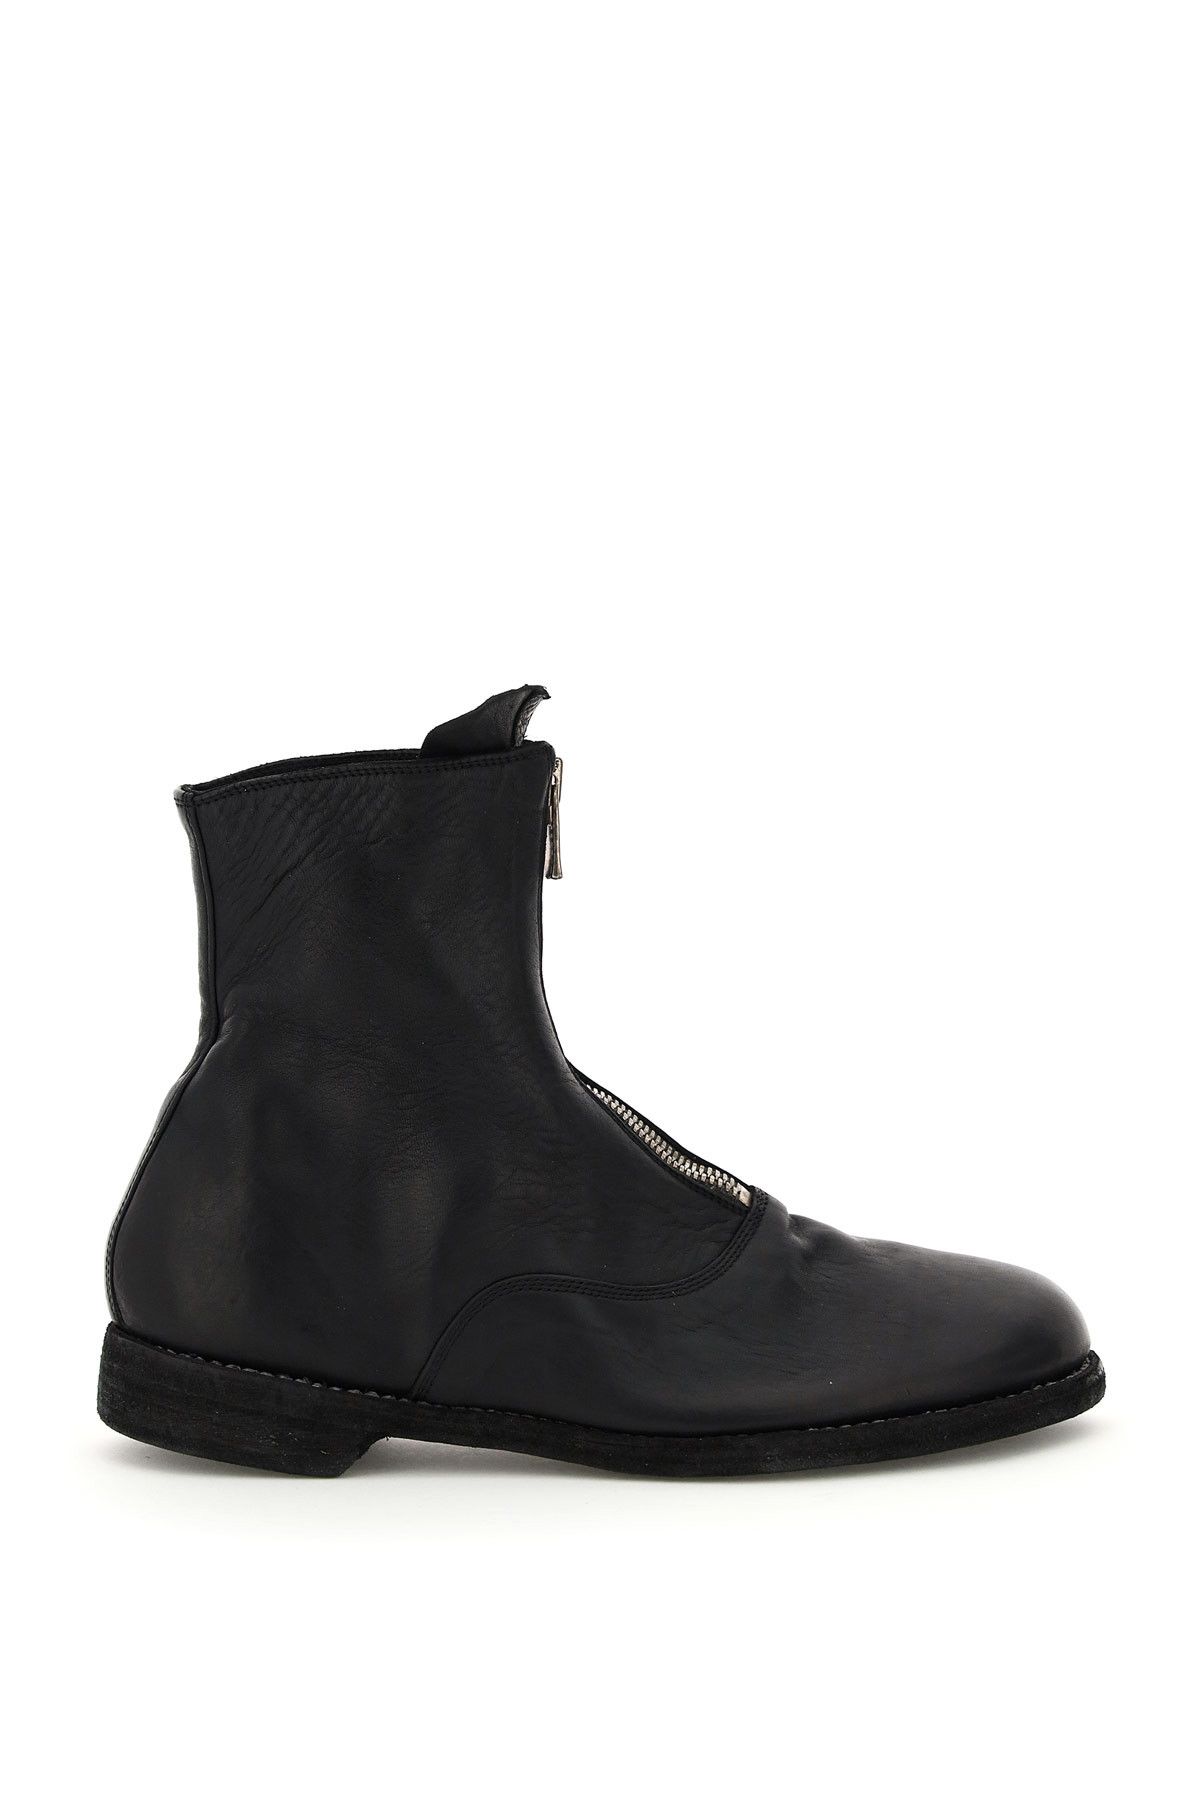 Guidi Guidi Front Zip Leather Ankle Boots | Grailed